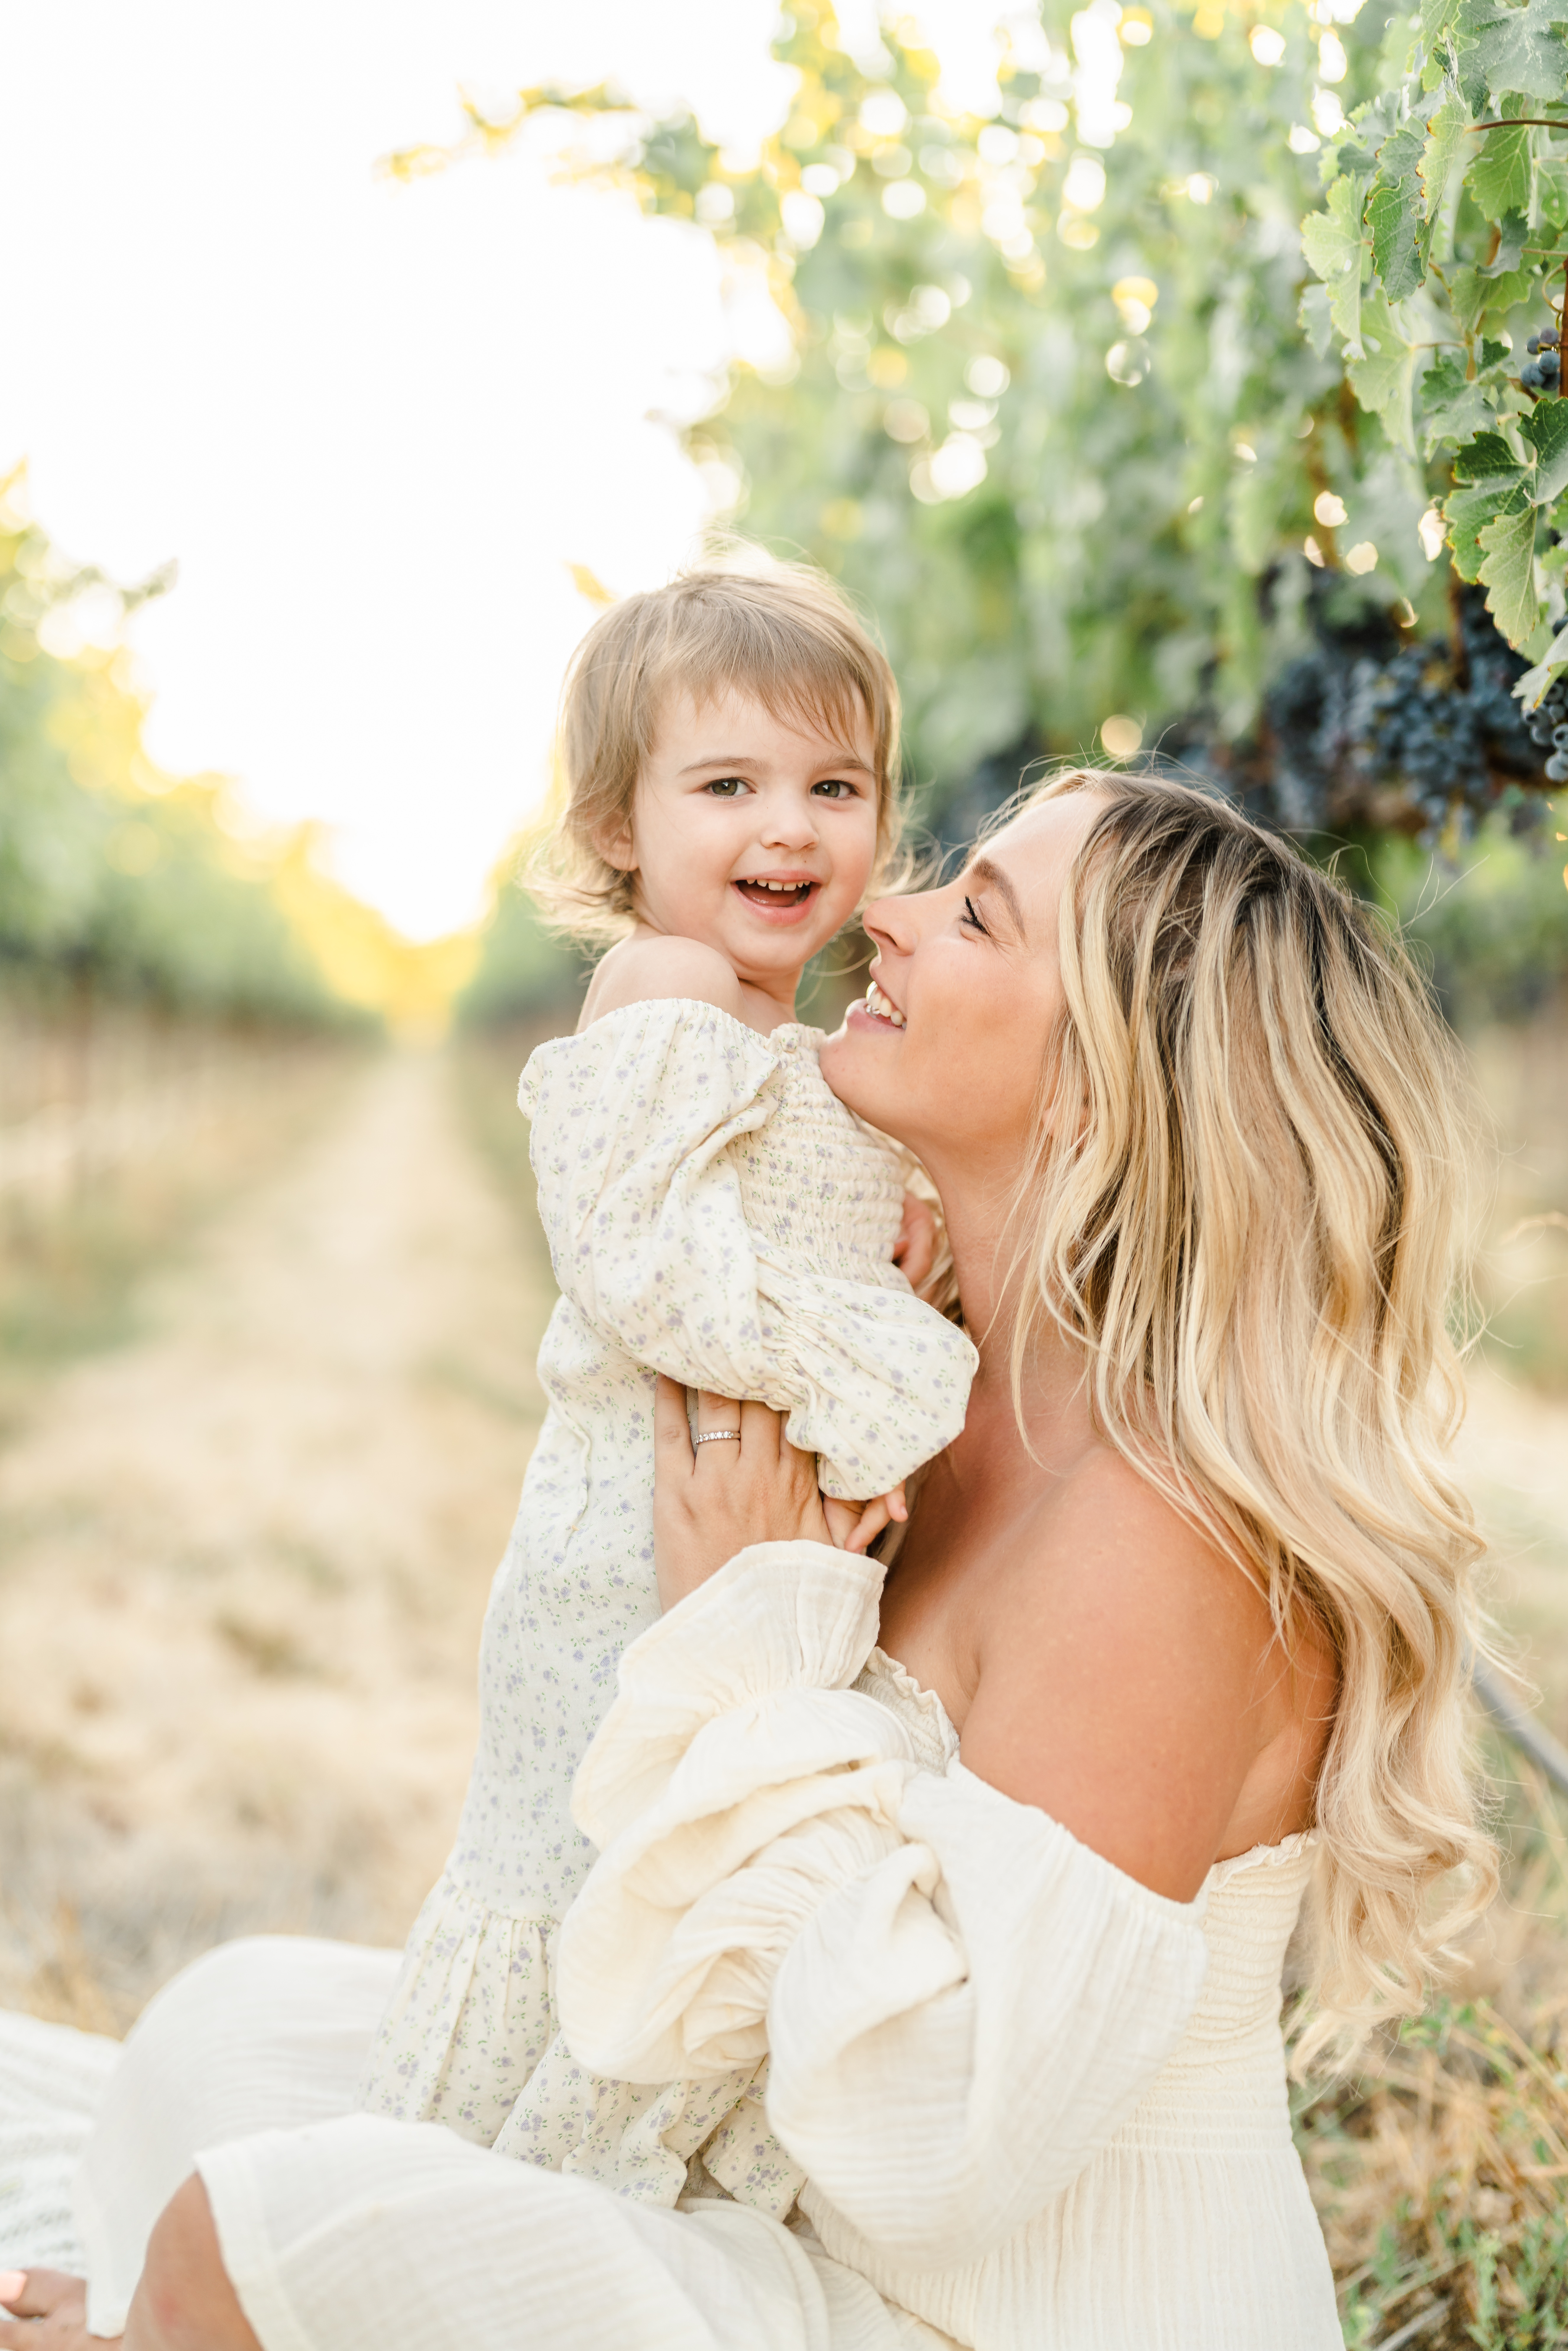 7 Tips for Genuine Smiles during Family Sessions